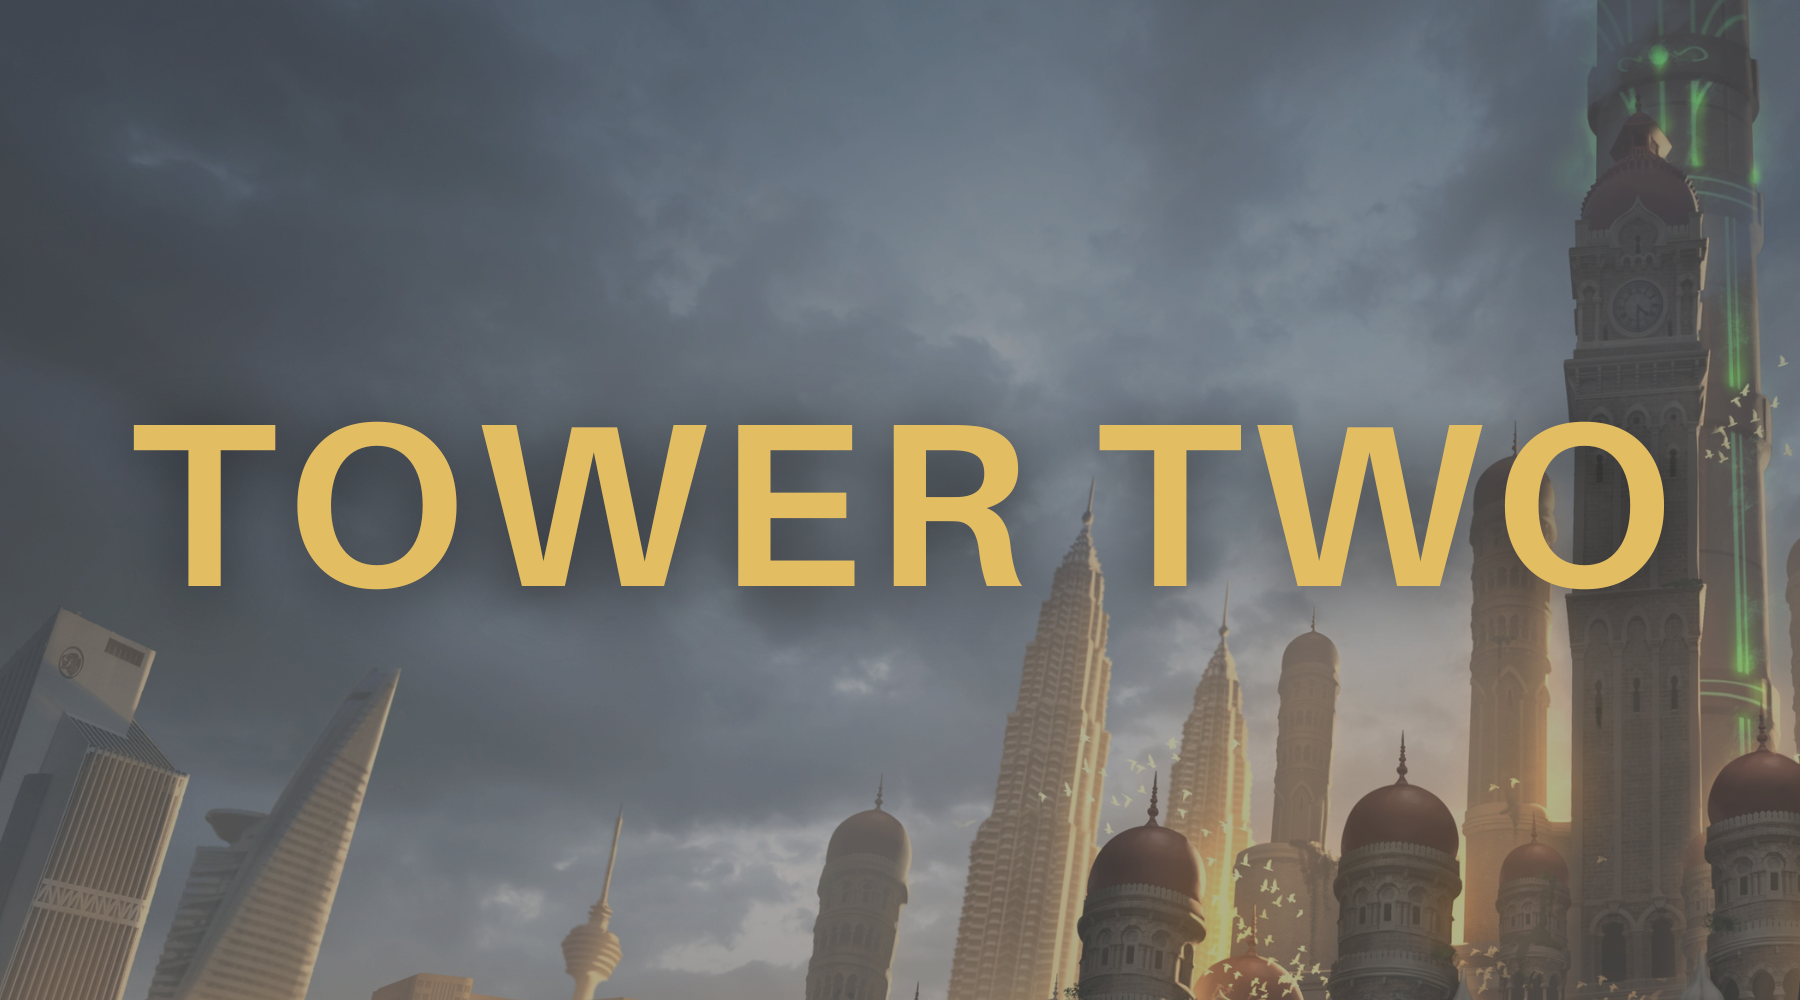 Tower Two of Climbing the Ranks - A Cultivation LitRPG Serial